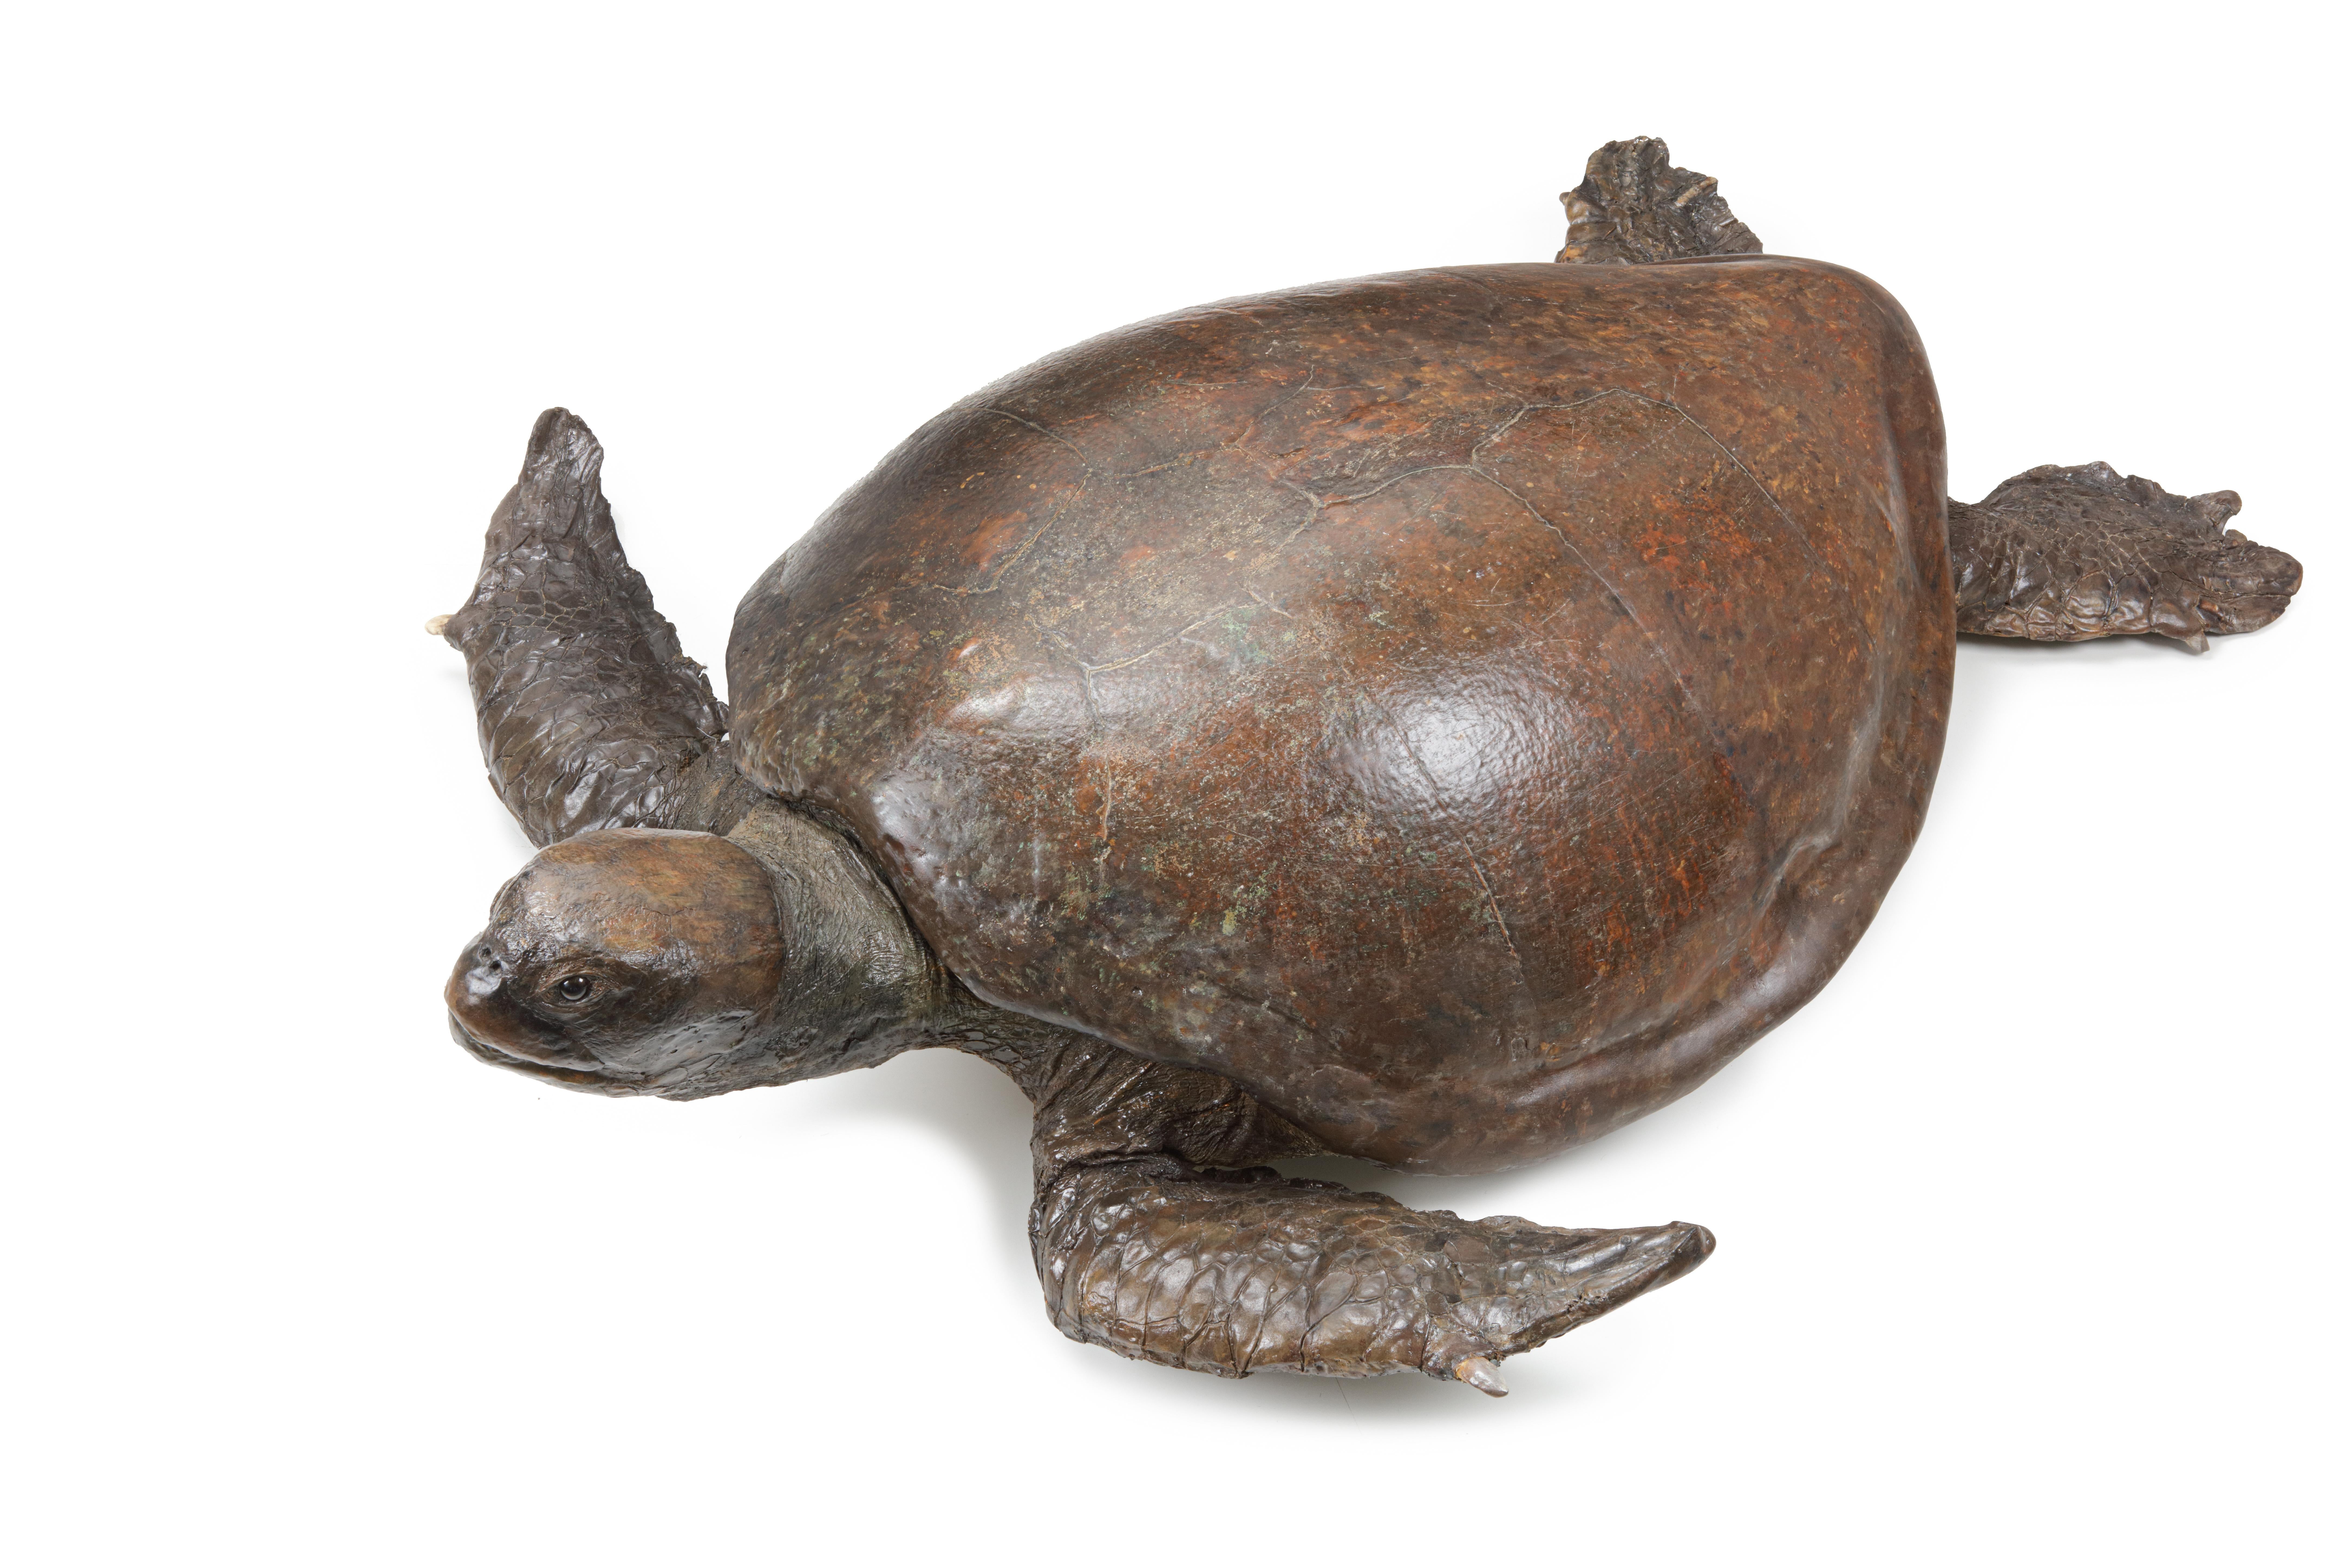 An extremely rare giant Victorian taxidermy Loggerhead sea turtle
England, 19th century

The extremely large animal with a nice patina, with some parts professionally restored and hand-painted.

Measure: L. 170 cm

Provenance:
Private